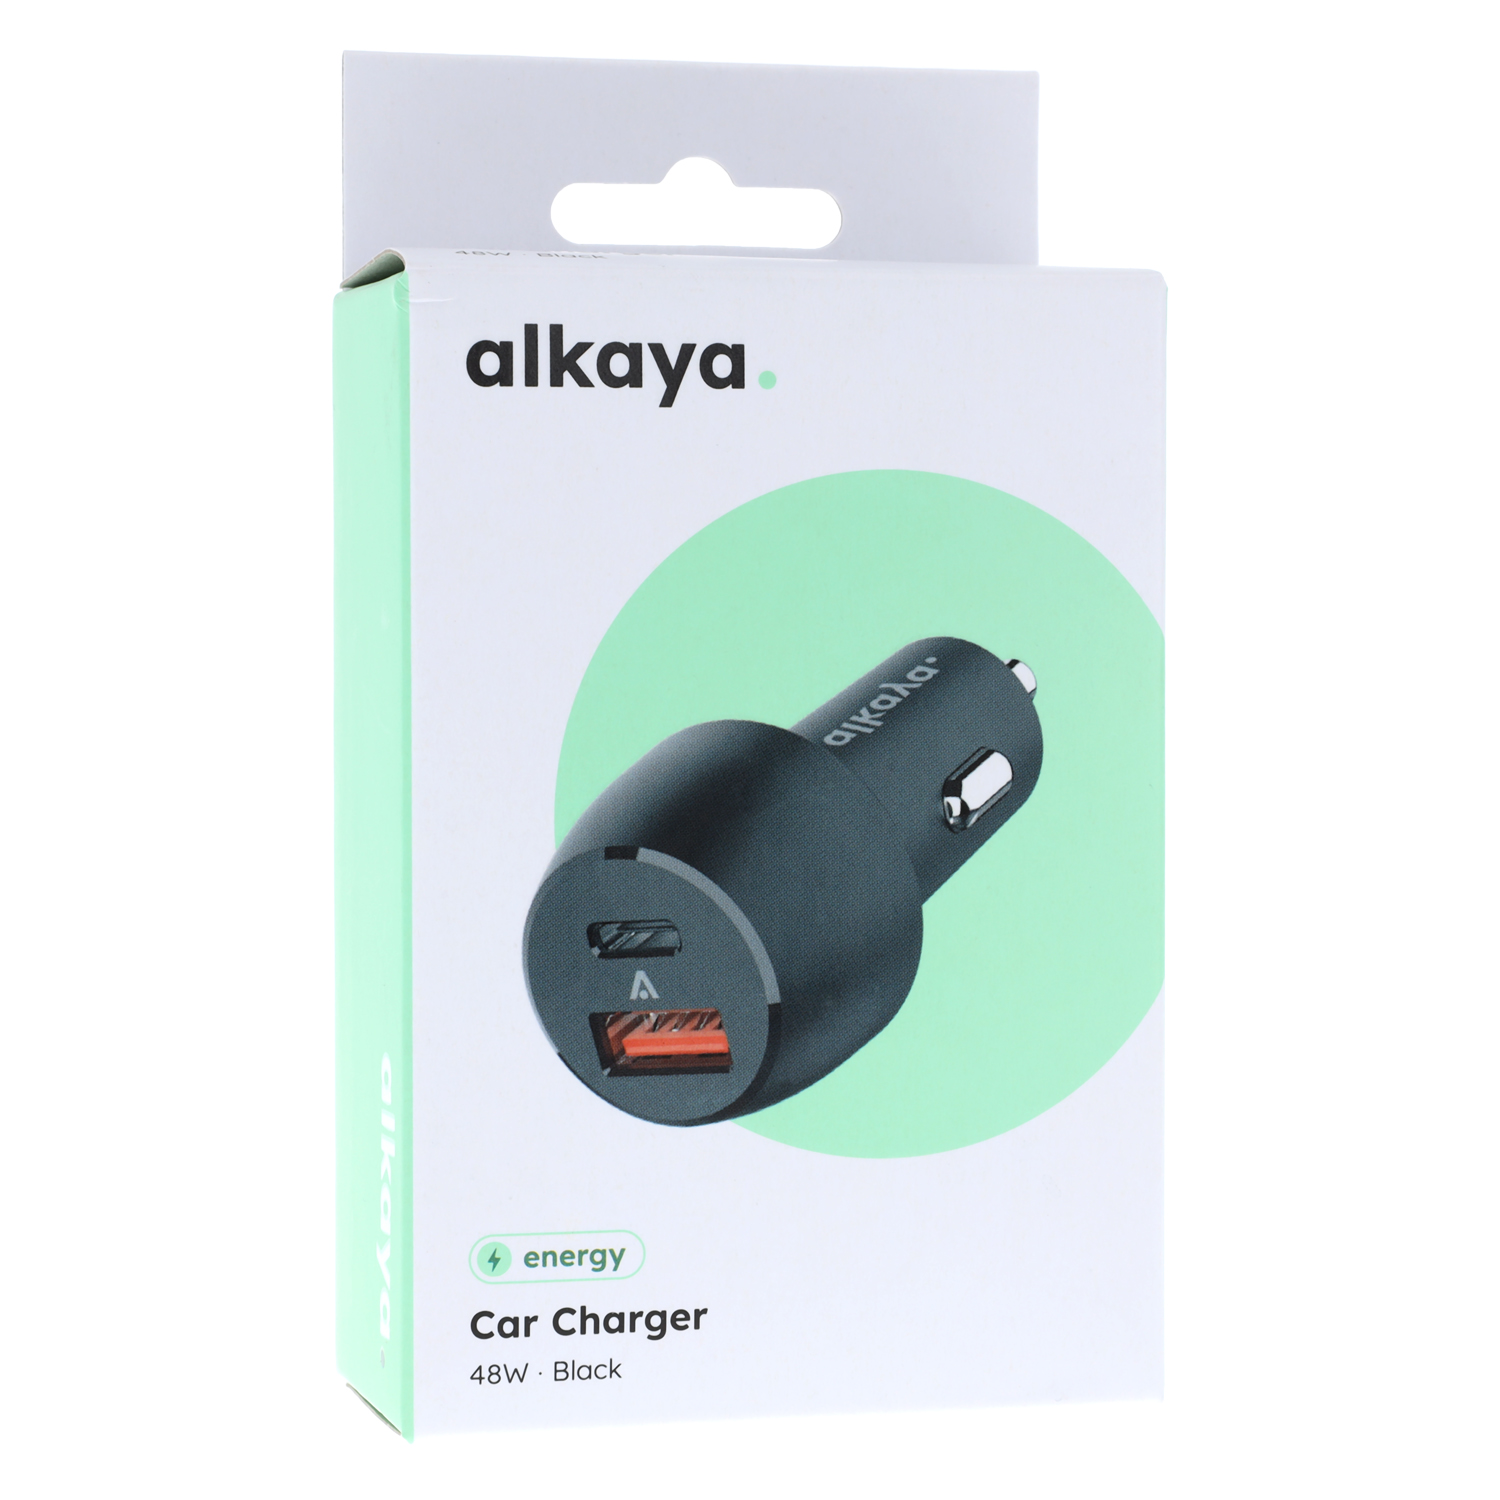 alkaya. | 2x Faster | Car charger for cigarette lighter 48W Dual Ports USB-C + USB-A Universal Compatibility, White